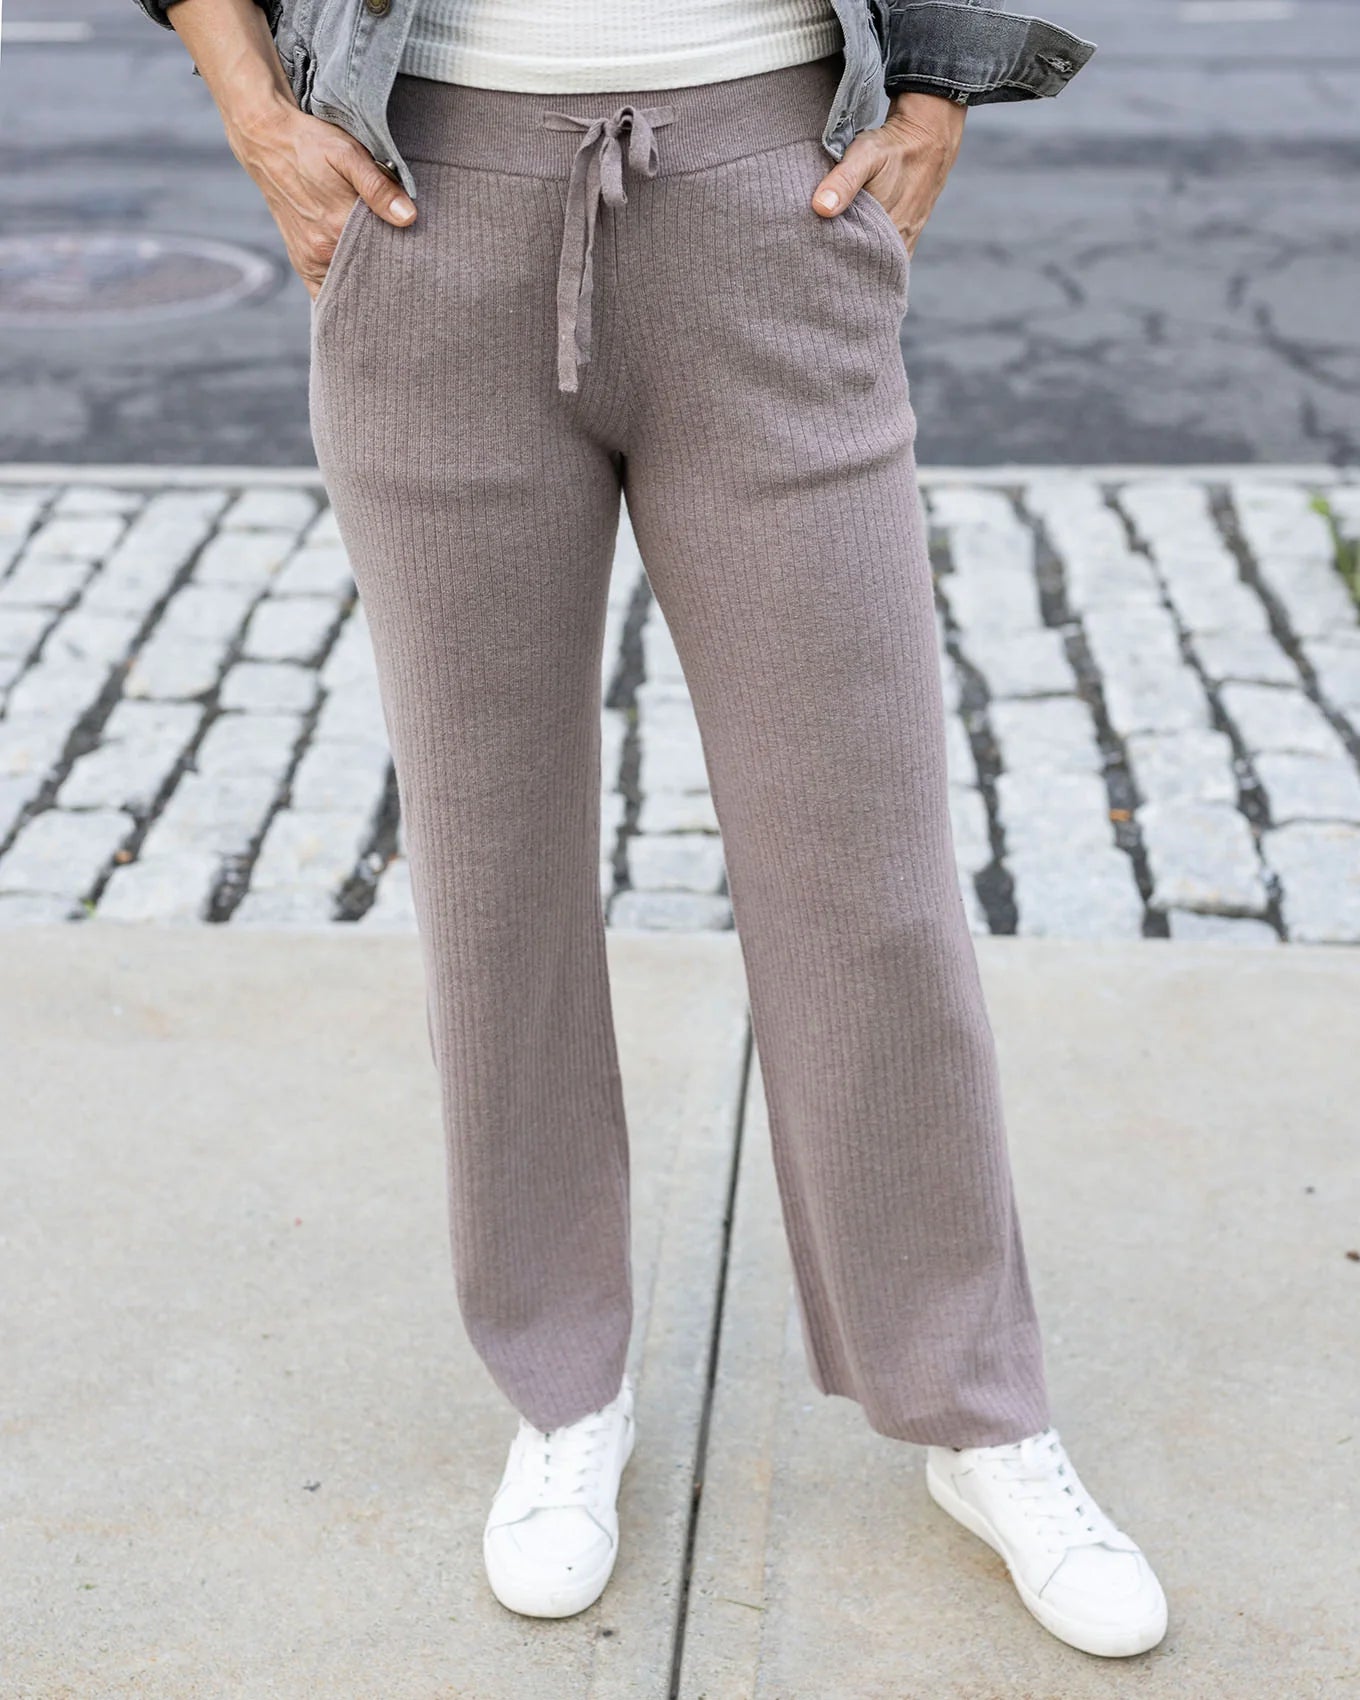 Lounge In Style With The Eras Era Drawstring Lounge Pants For Comfort At  Home – Latchkey